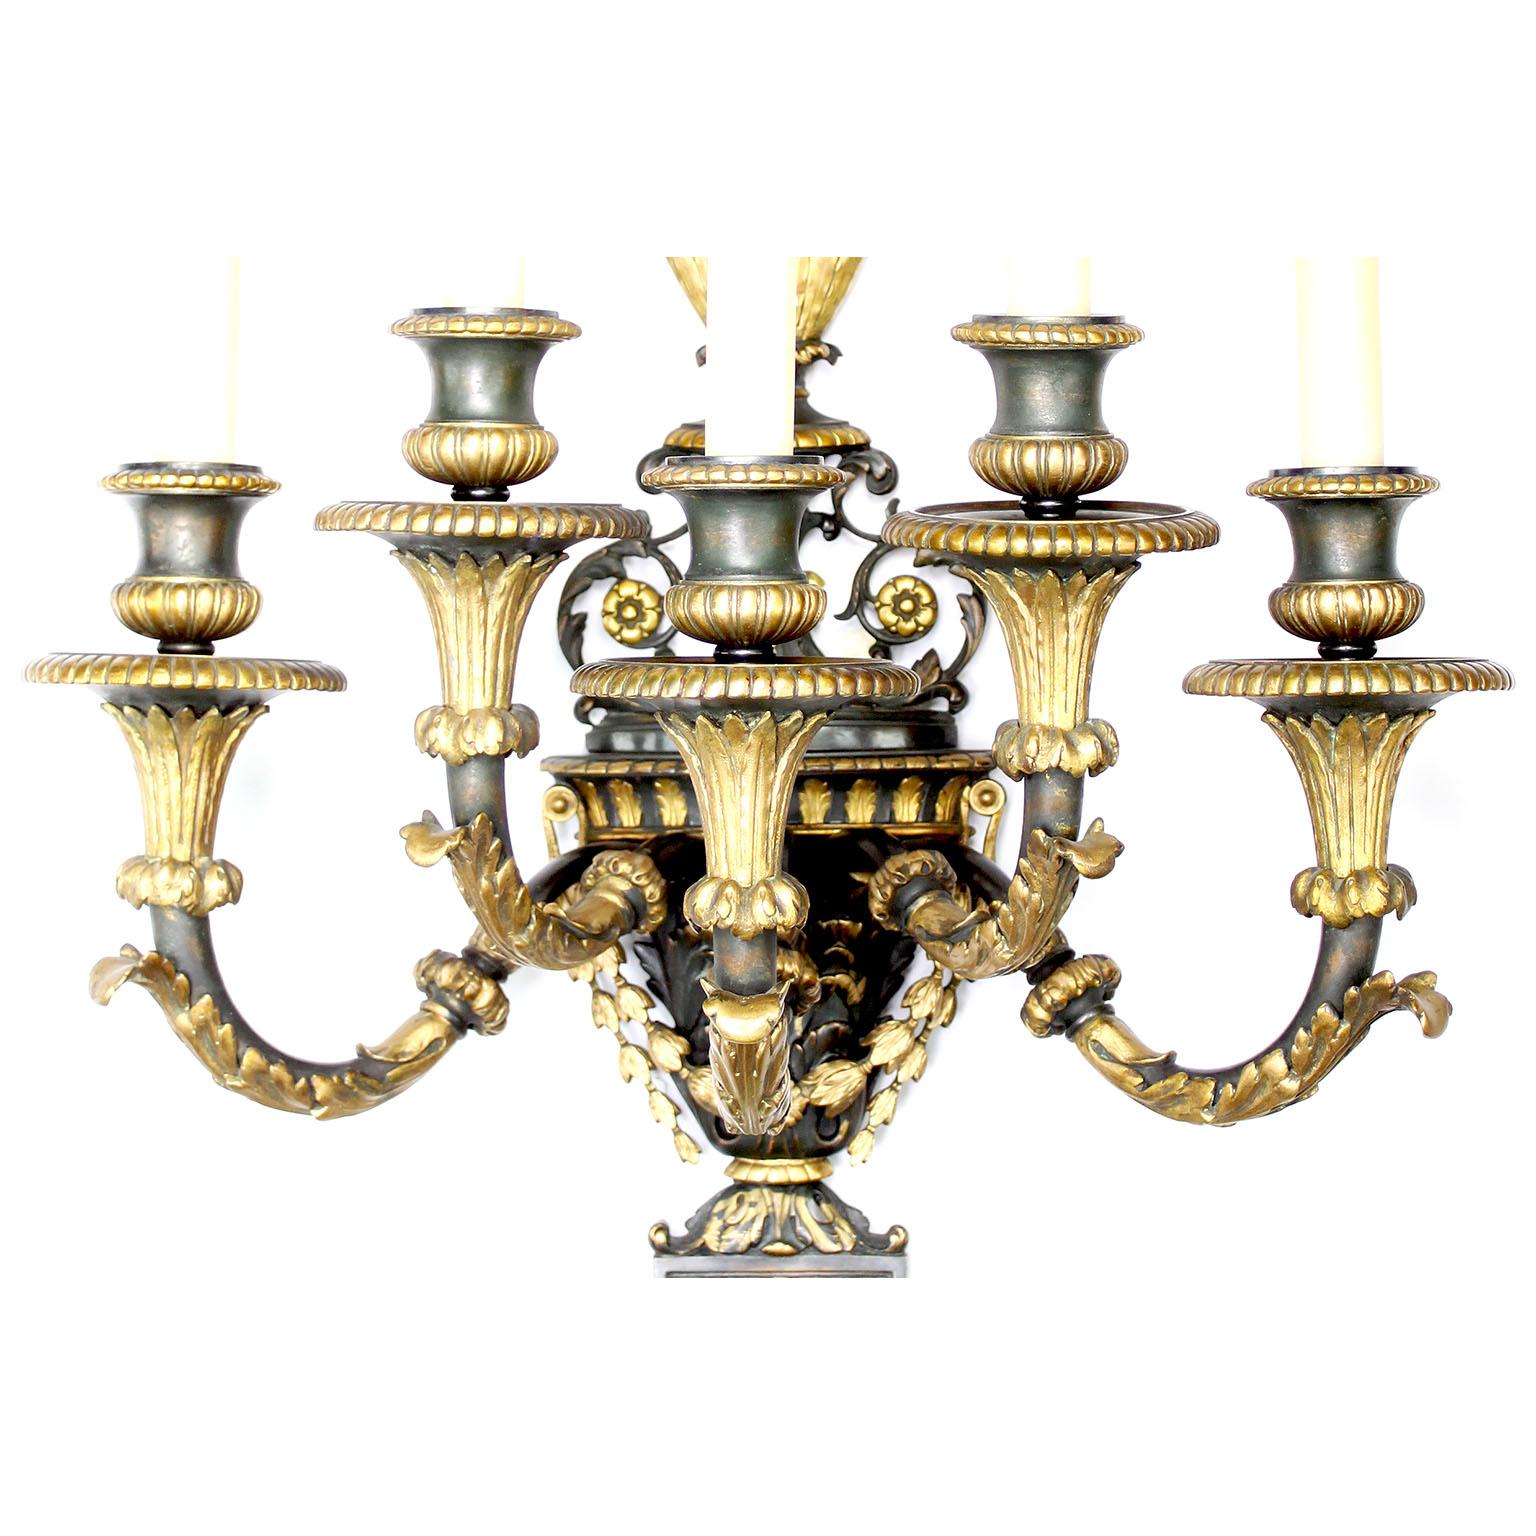 Patinated Pr. French 19th Century Empire Neoclassical Style Parcel-Gilt Bronze Wall Lights For Sale